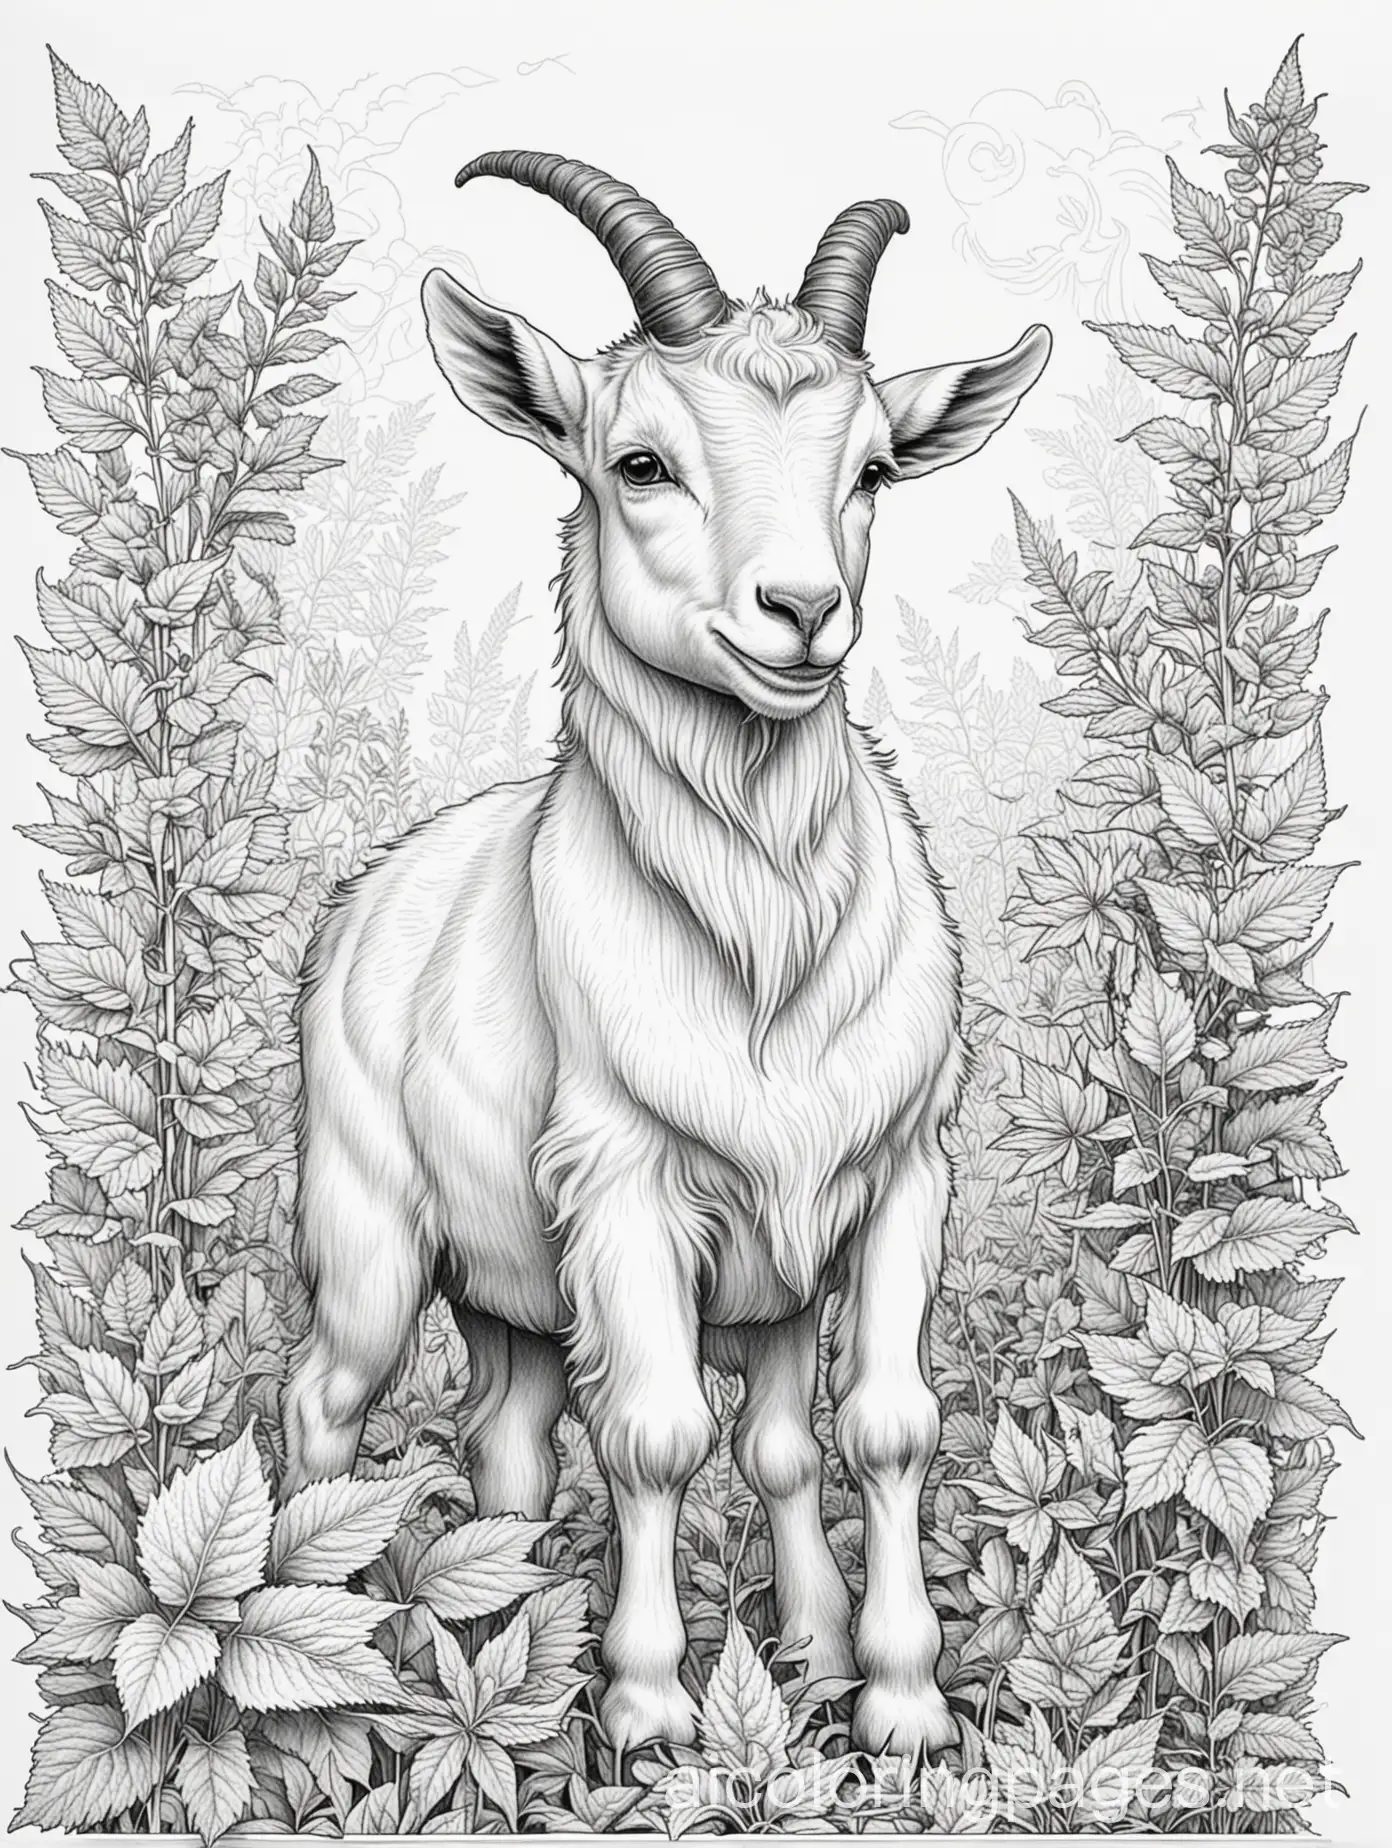 goats cannabis fantasy, Coloring Page, black and white, line art, white background, Simplicity, Ample White Space. The background of the coloring page is plain white to make it easy for young children to color within the lines. The outlines of all the subjects are easy to distinguish, making it simple for kids to color without too much difficulty